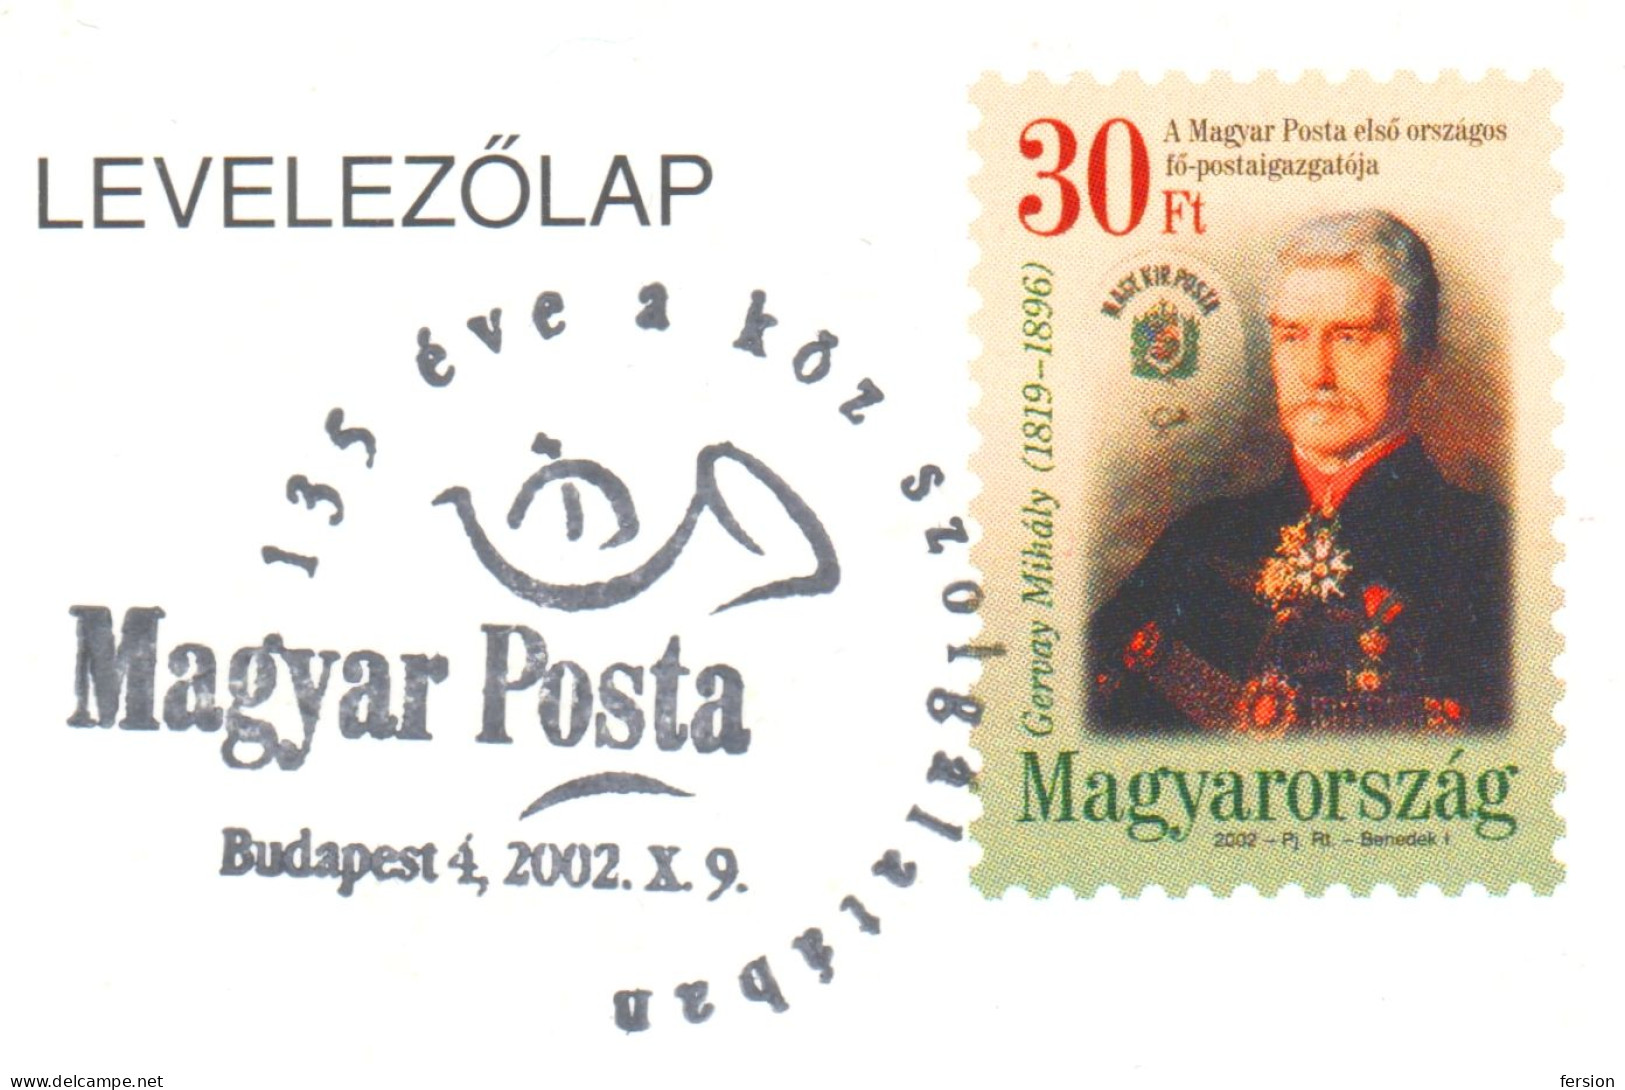 COMPUTER Telegraph MAILBOX Stamp On Stamp CD POSTCARD 1997 UPU Gervay Mihály POST Director STATIONERY 2002 HUNGARY FDC - Correo Postal